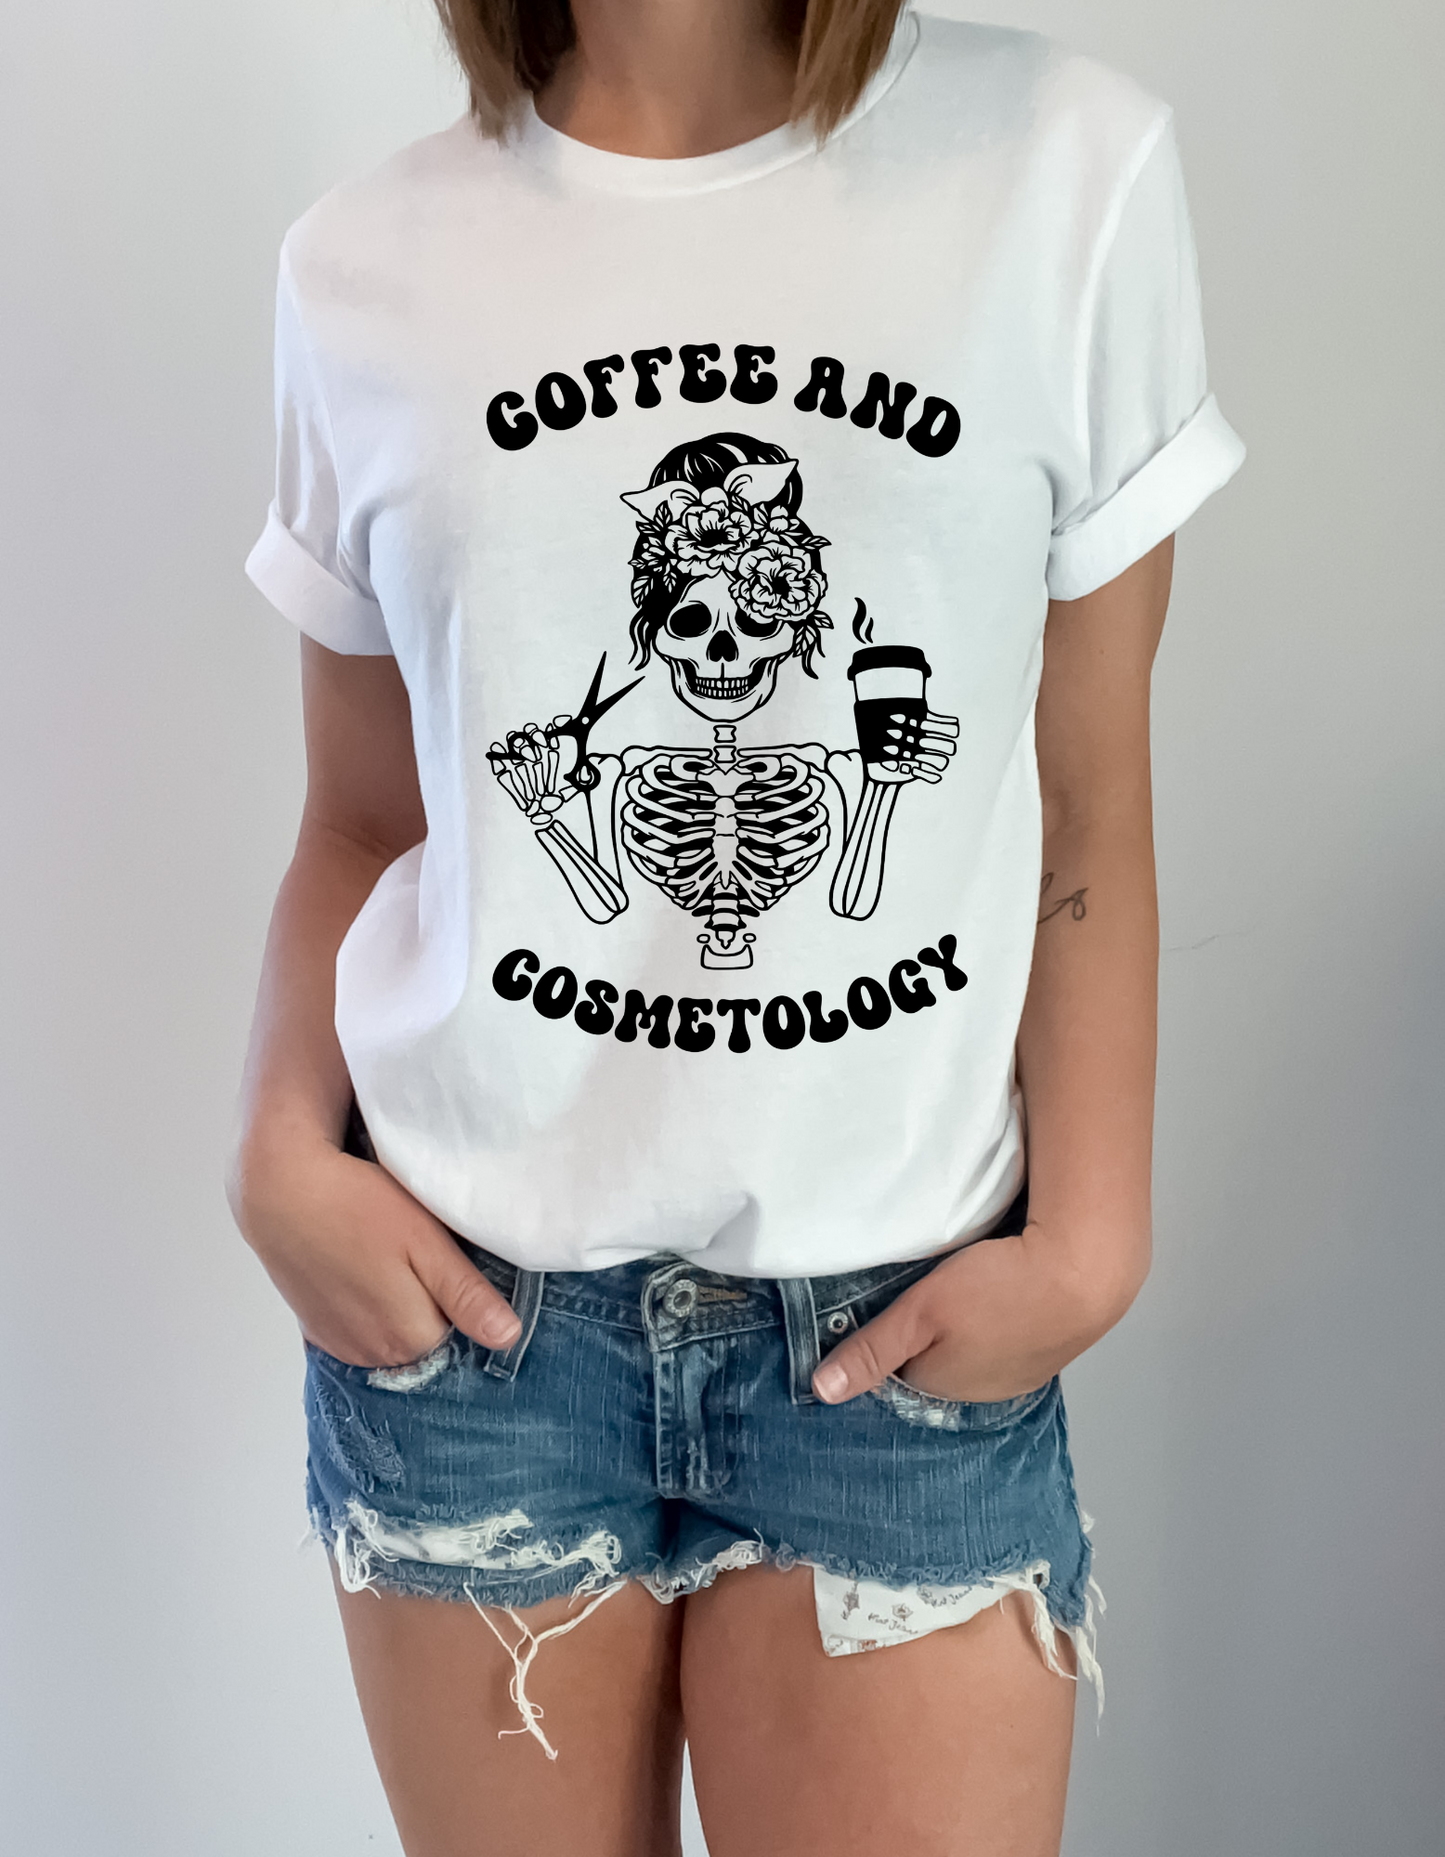 Coffee and Cosmetology T-shirt